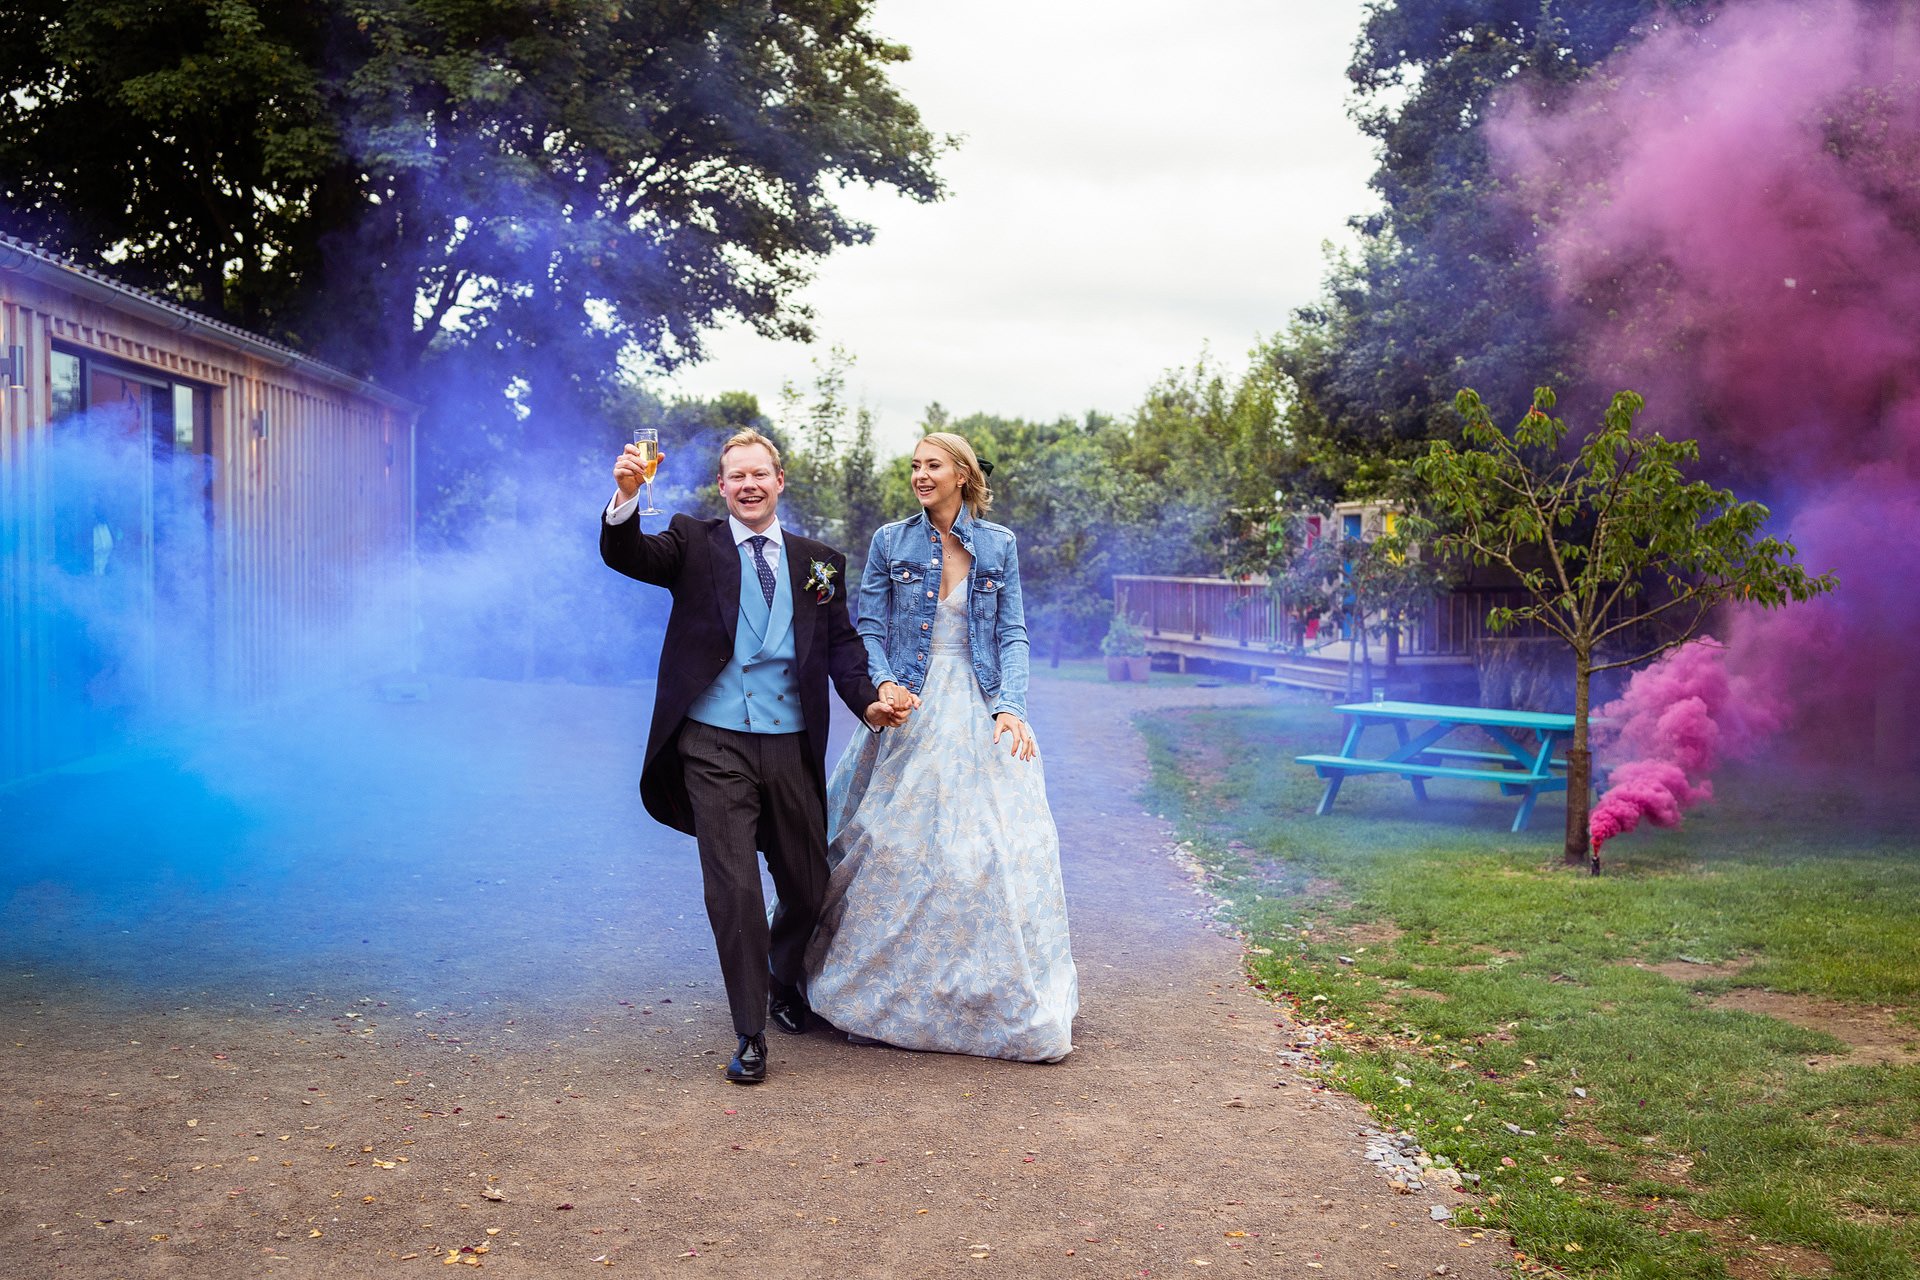 Smoke bombs bride and groom entrance at The Holford Arms